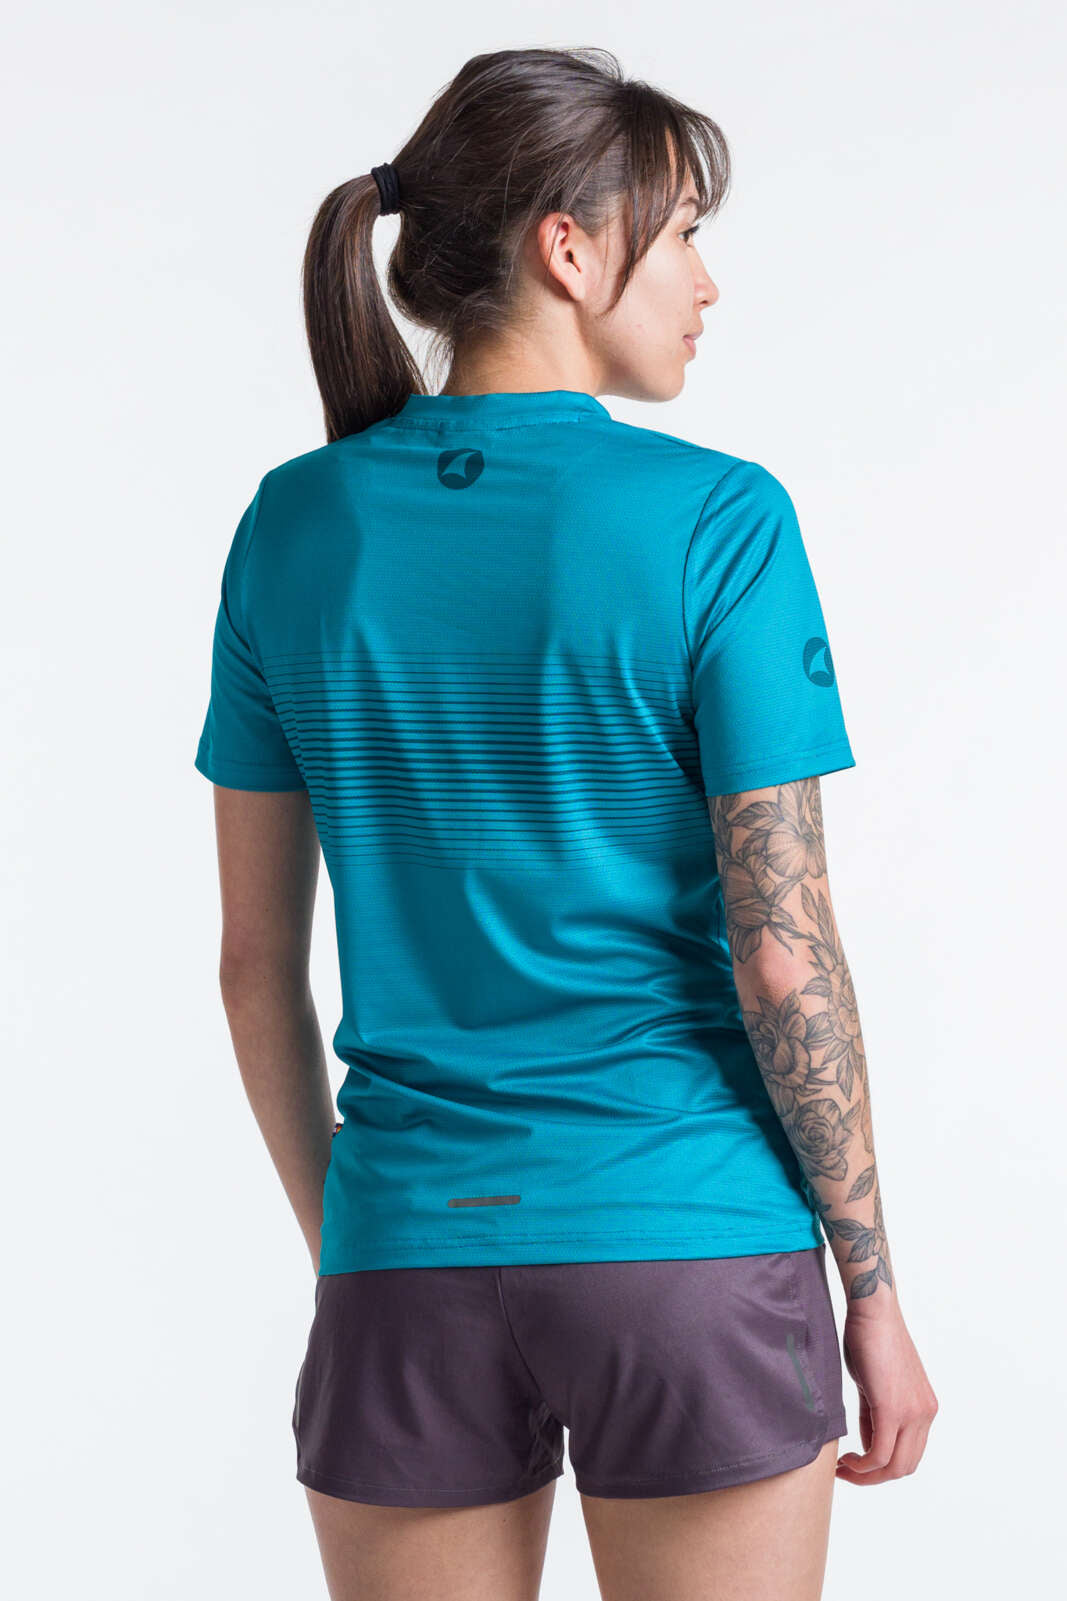 Women's Teal Running Shirt | Breathable & Lightweight | Pactimo